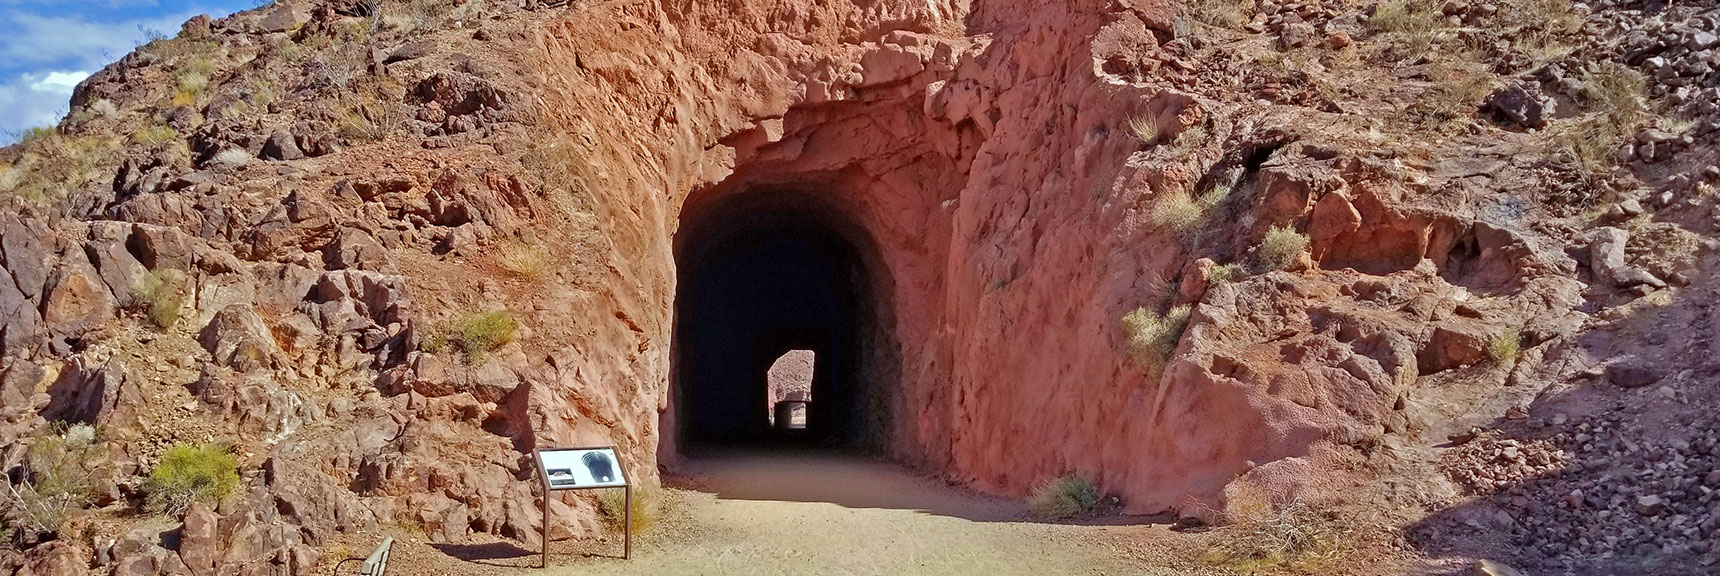 The Rock Through Which the Tunnels Are Carved is Likely Basalt | Historic Railroad Trail | Lake Mead National Recreation Area, Nevada